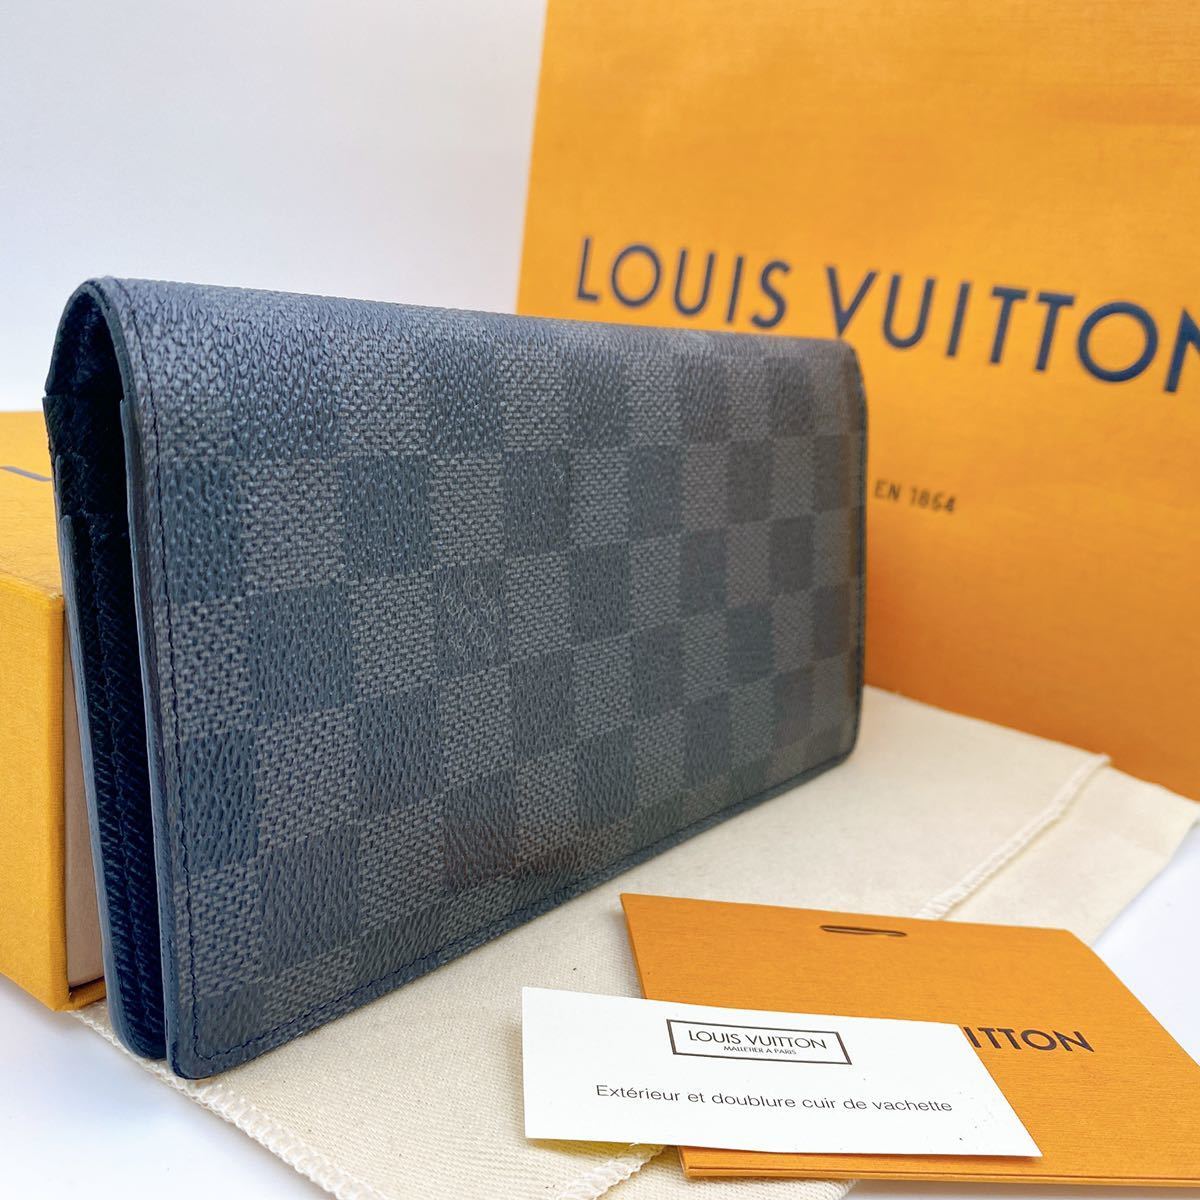 A463【美品】LOUIS VUITTON ルイヴィトン ダミエ グラフィット